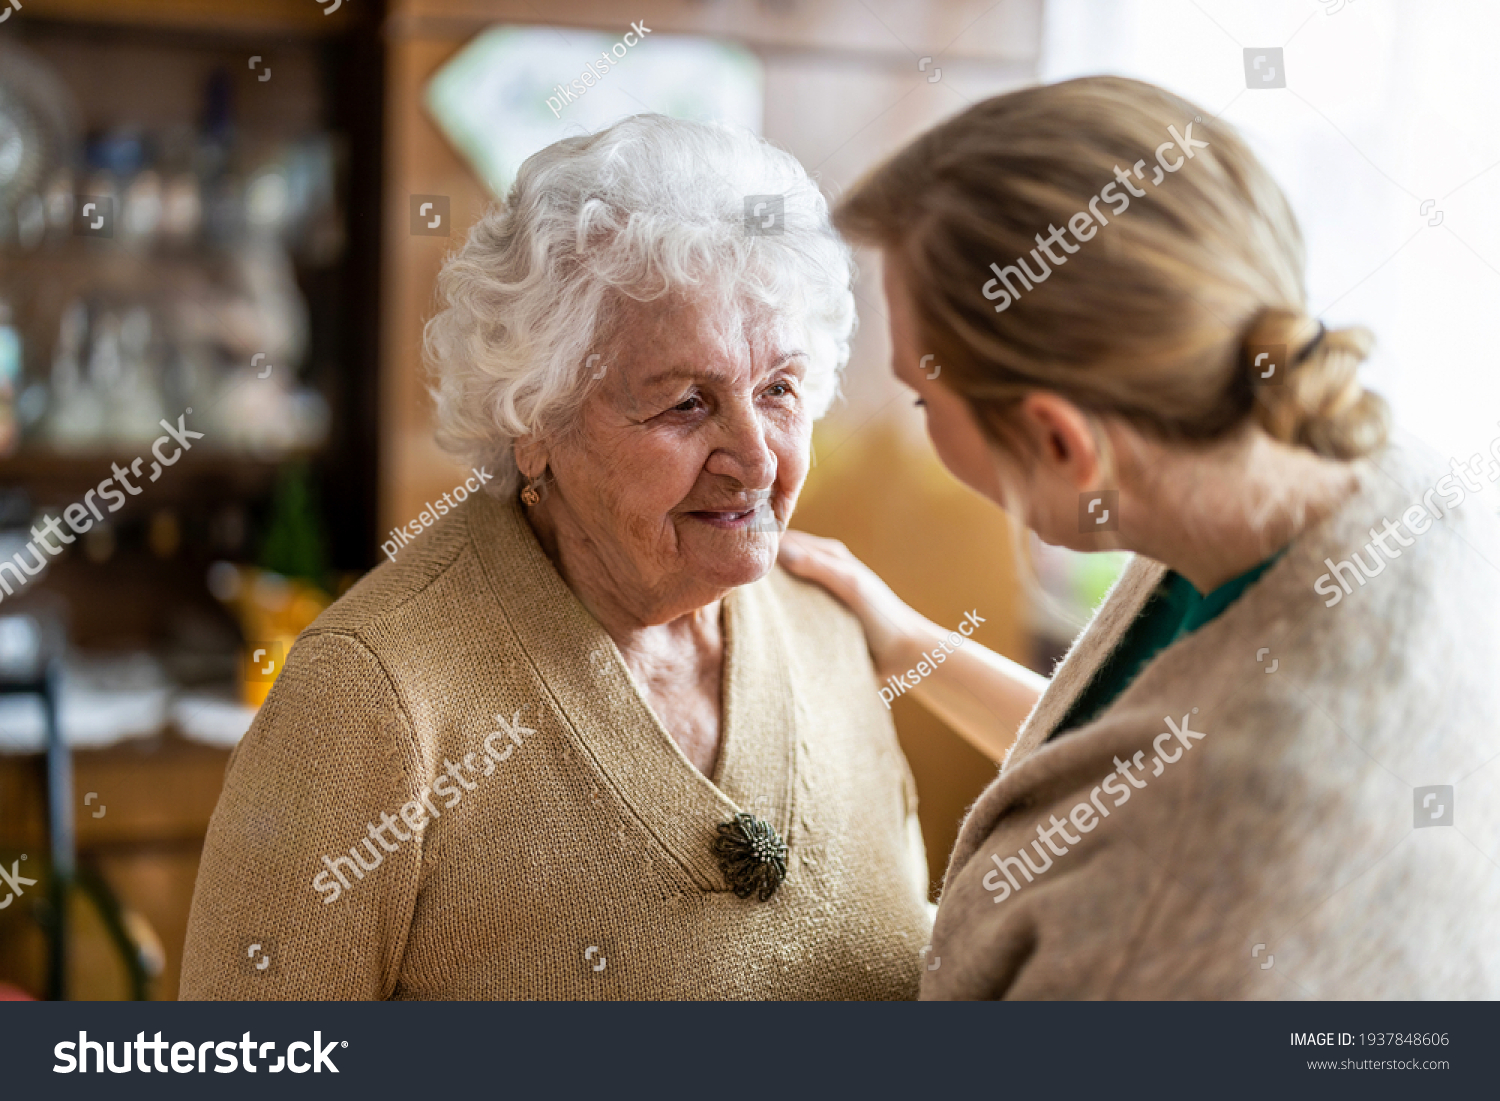 Health visitor talking to a senior woman during home visit
 #1937848606